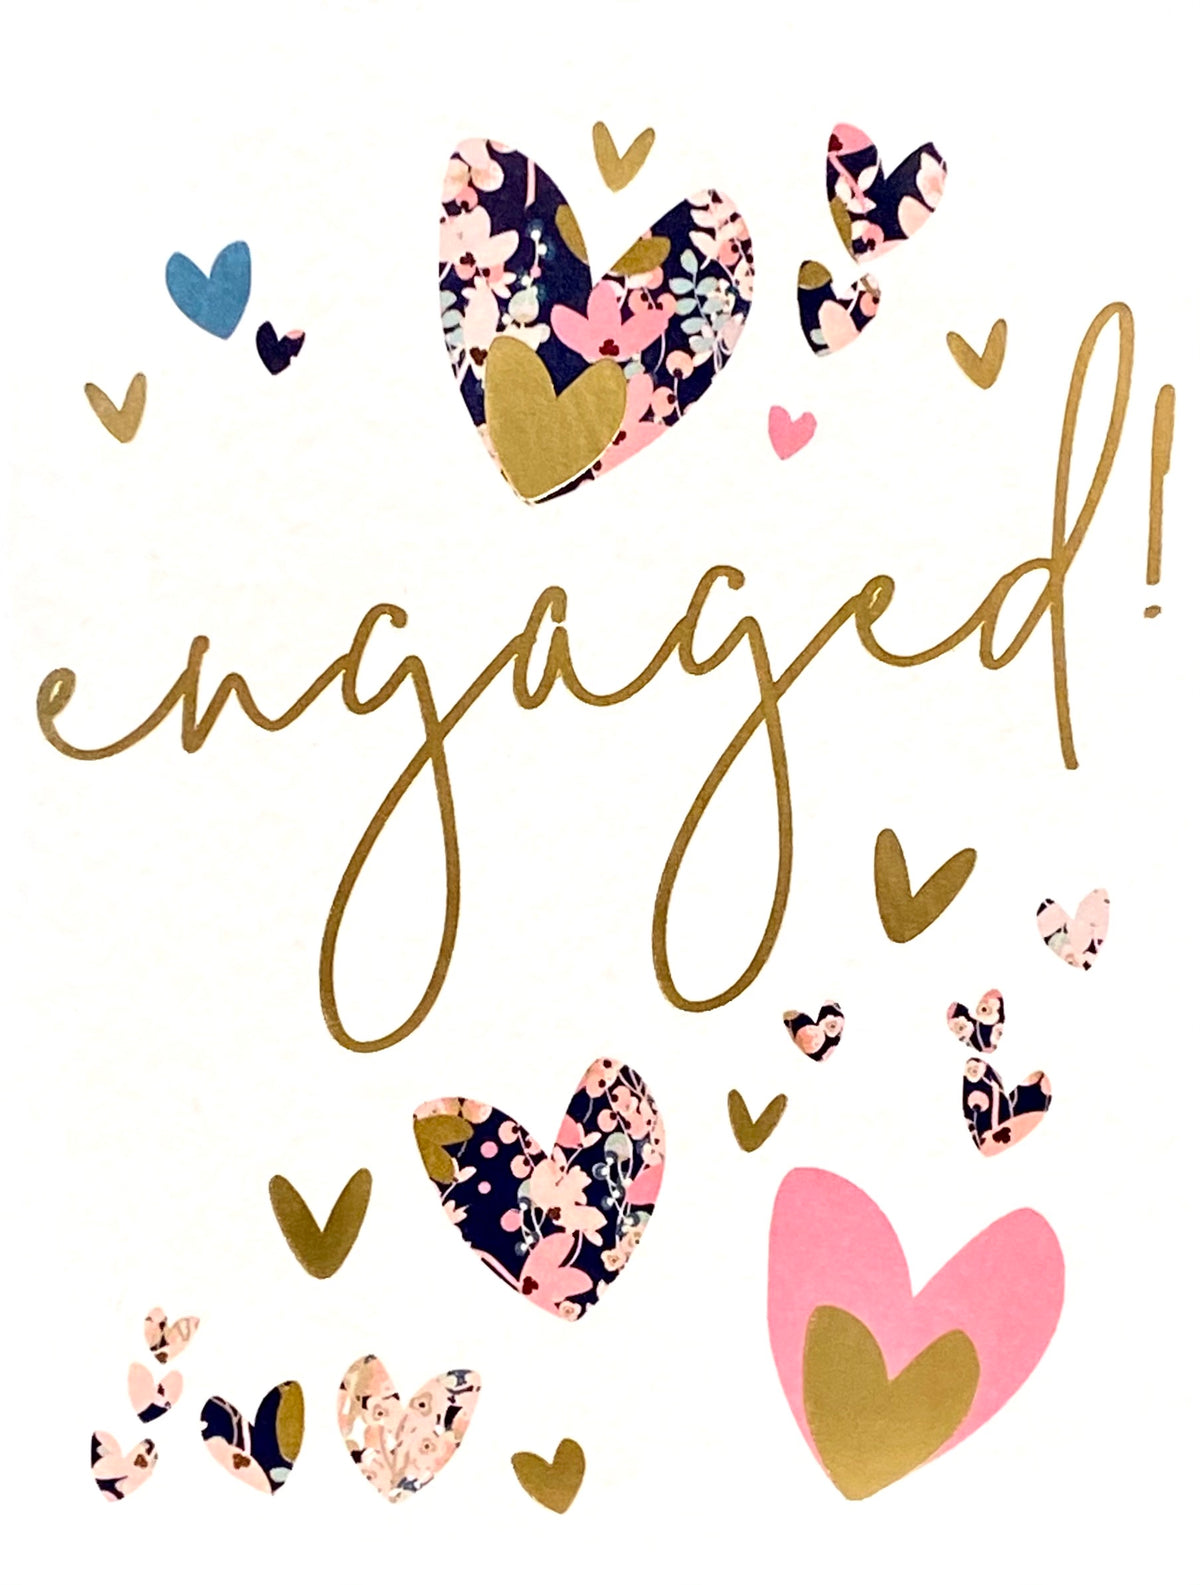 Engagement Card- Engaged! Assorted Heart Design